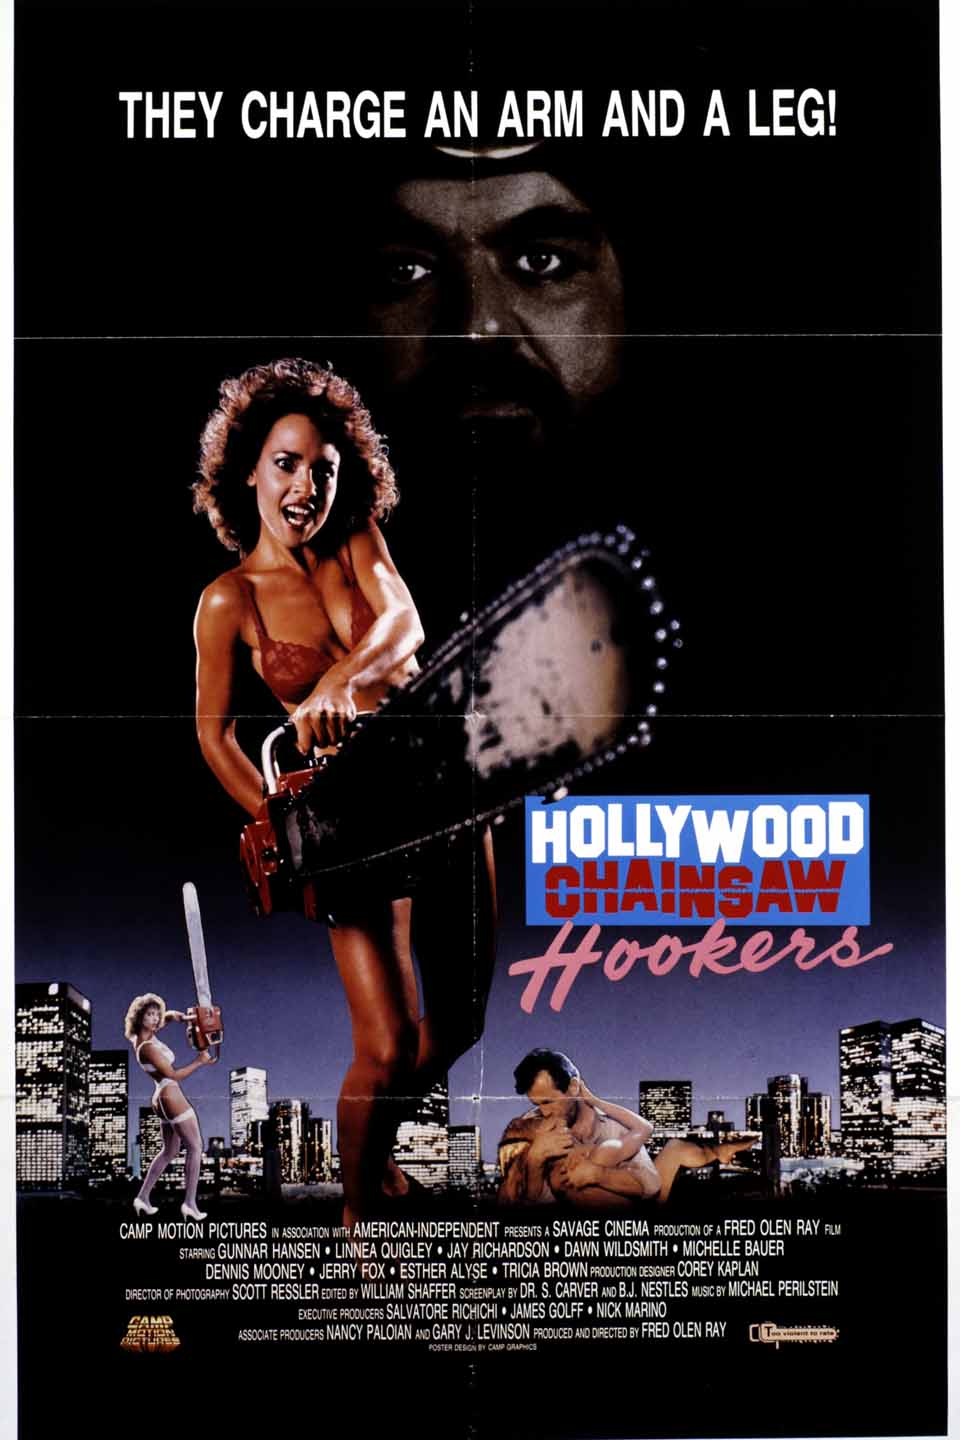 Hookers of Hollywood